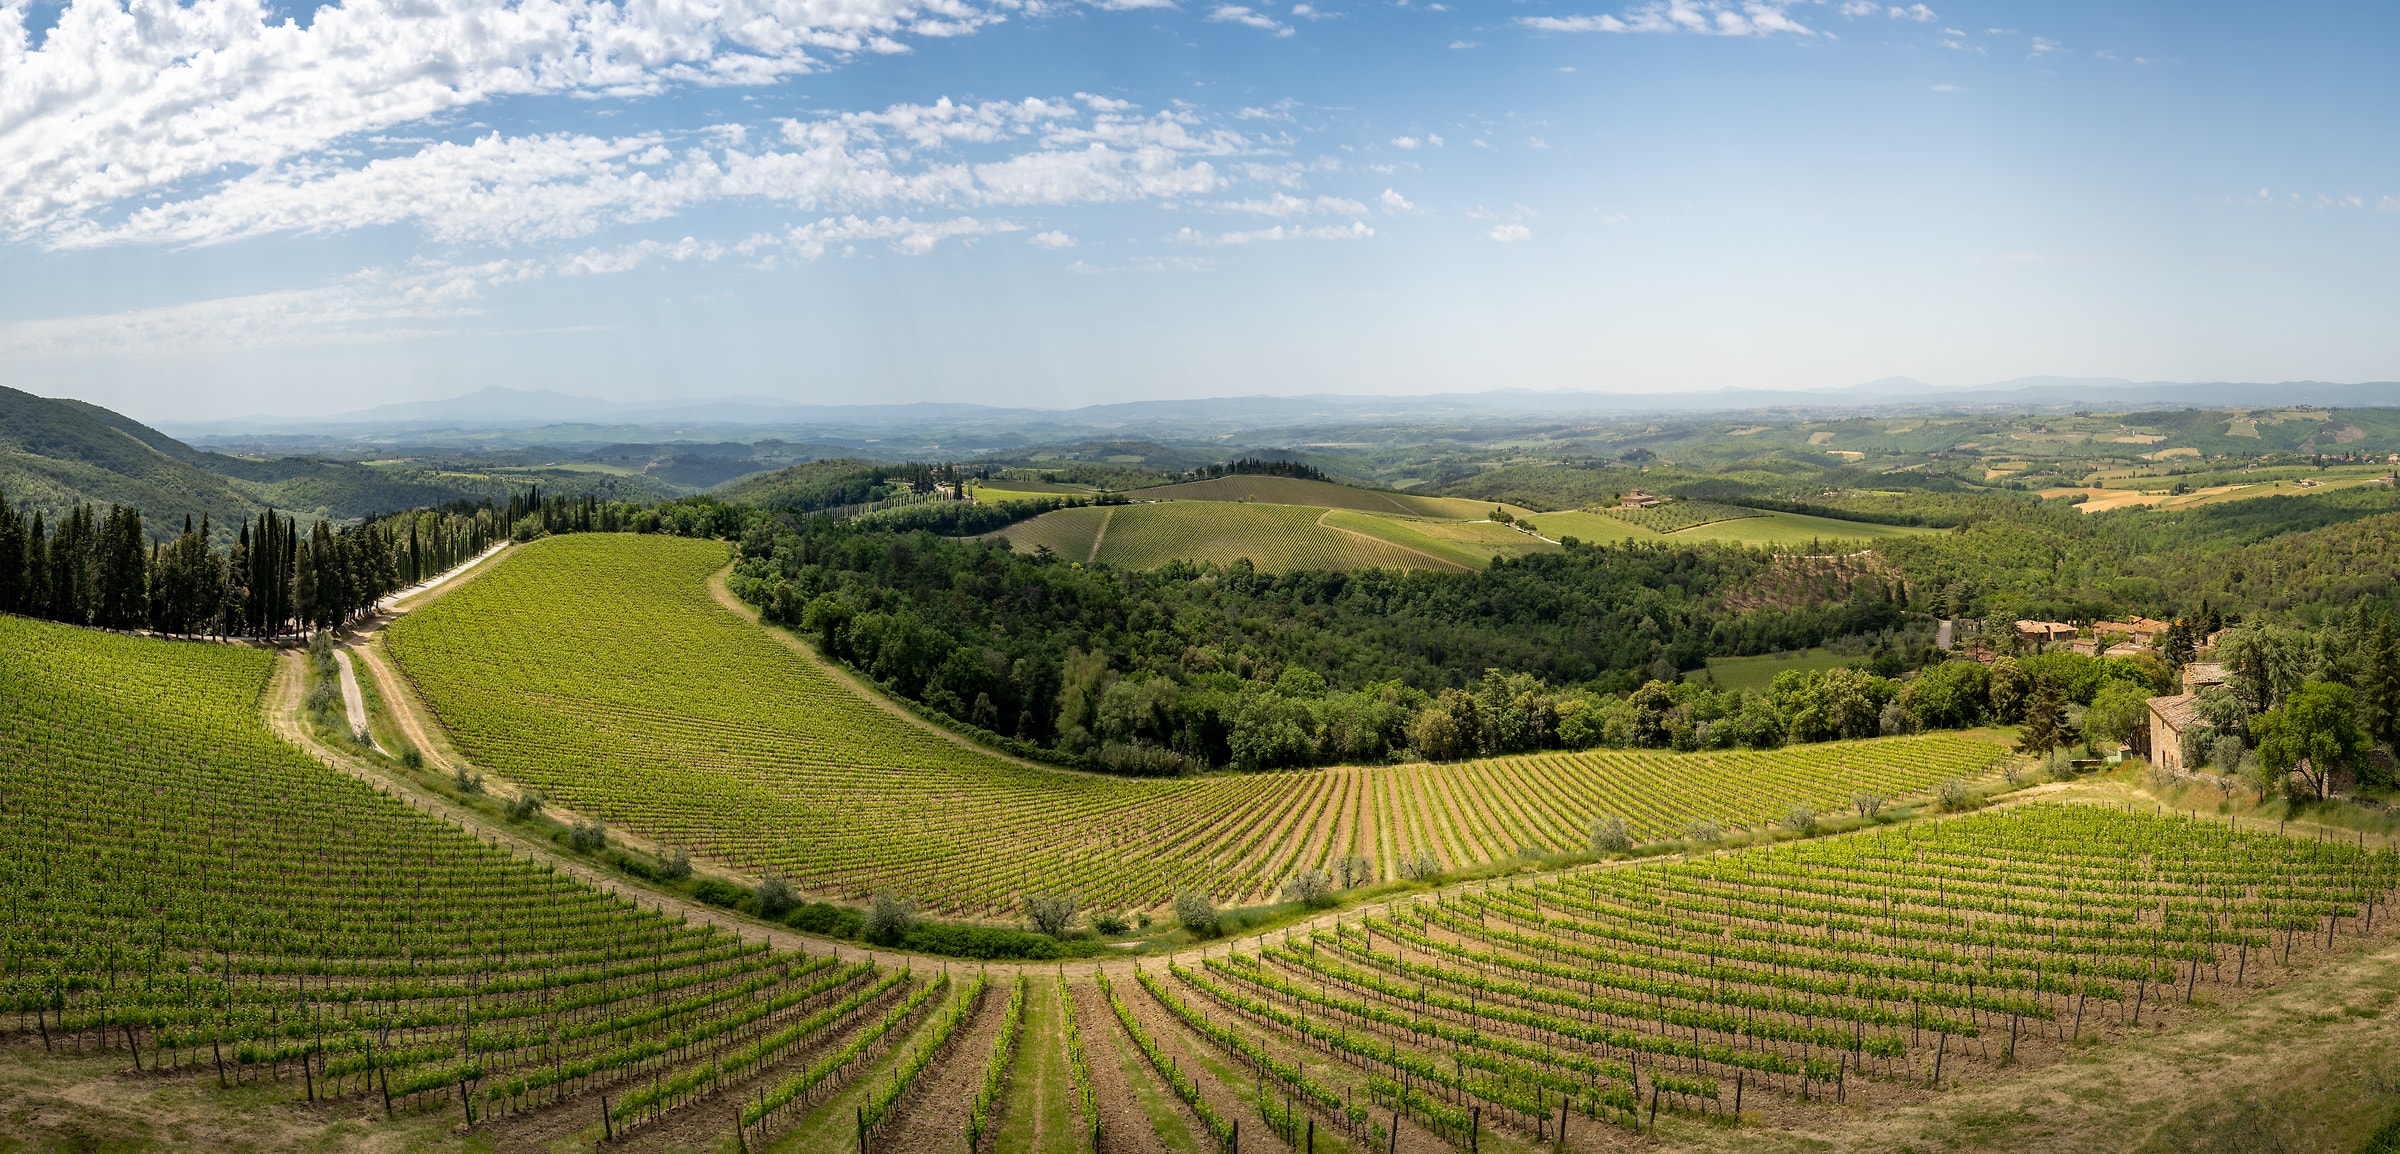 558 megapixels! A very high resolution, large-format VAST photo print of wine vineyards; landscape photograph created by Justin Katz in Castello di Brolio, Gaiole in Chianti, Tuscany, Italy